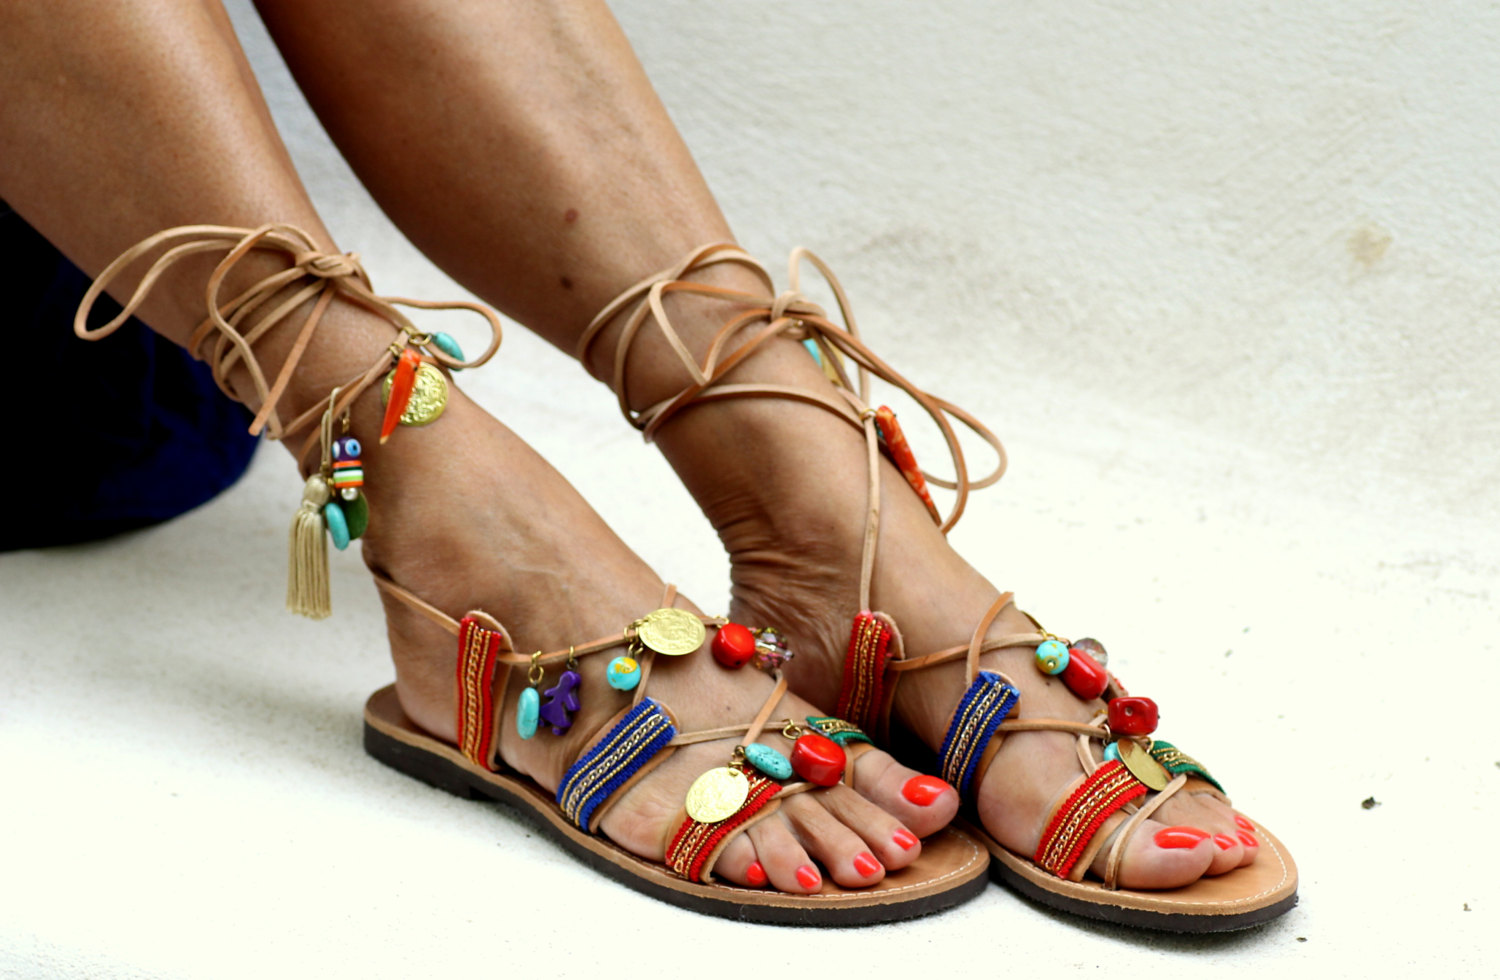 No doubt, these sandals are worthy of a Greek goddess. A modern one ...